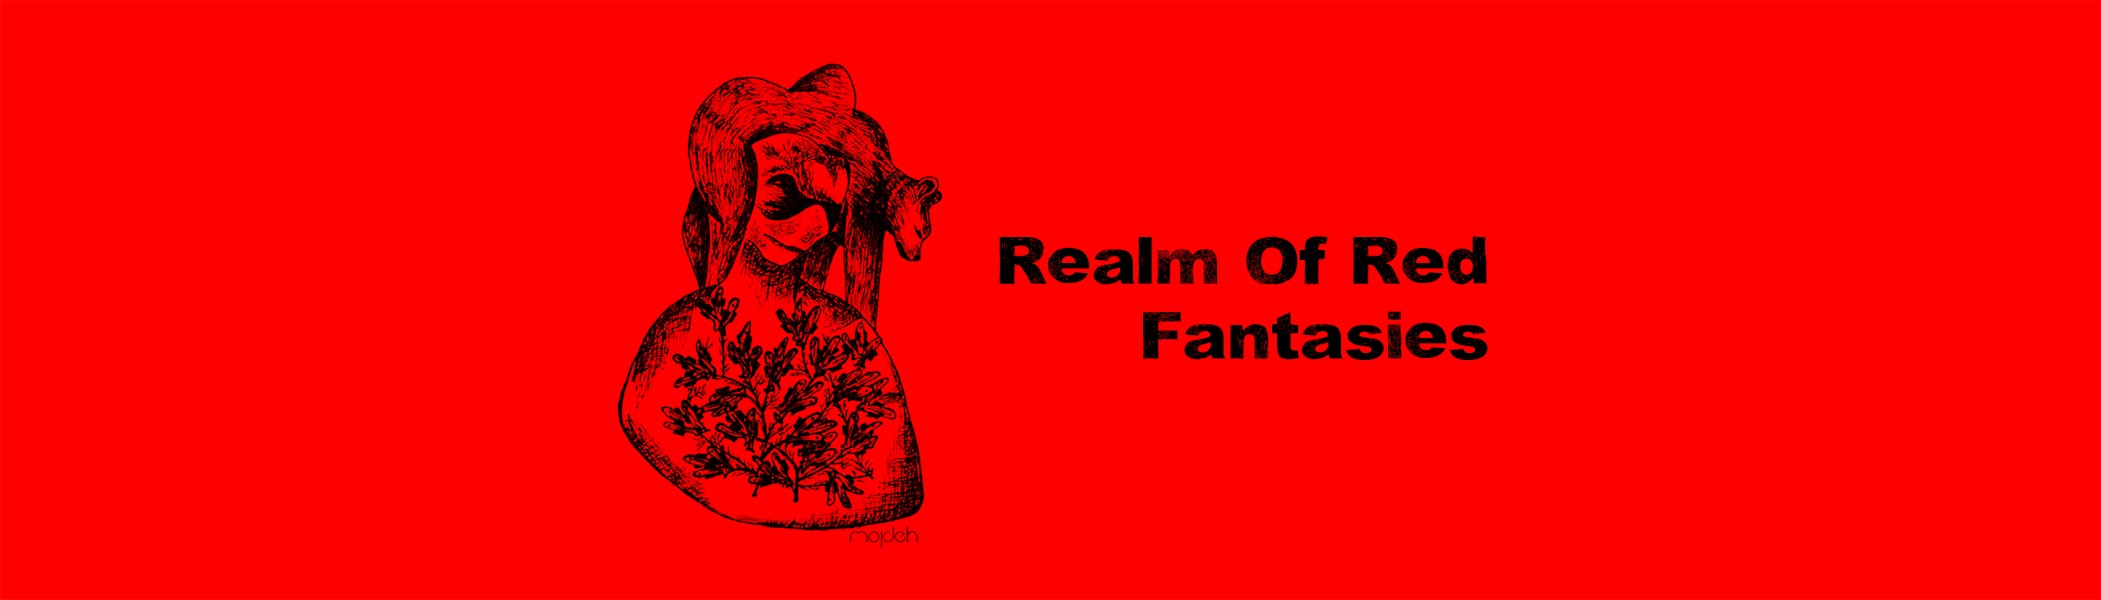 Realm Of Red Fantasies